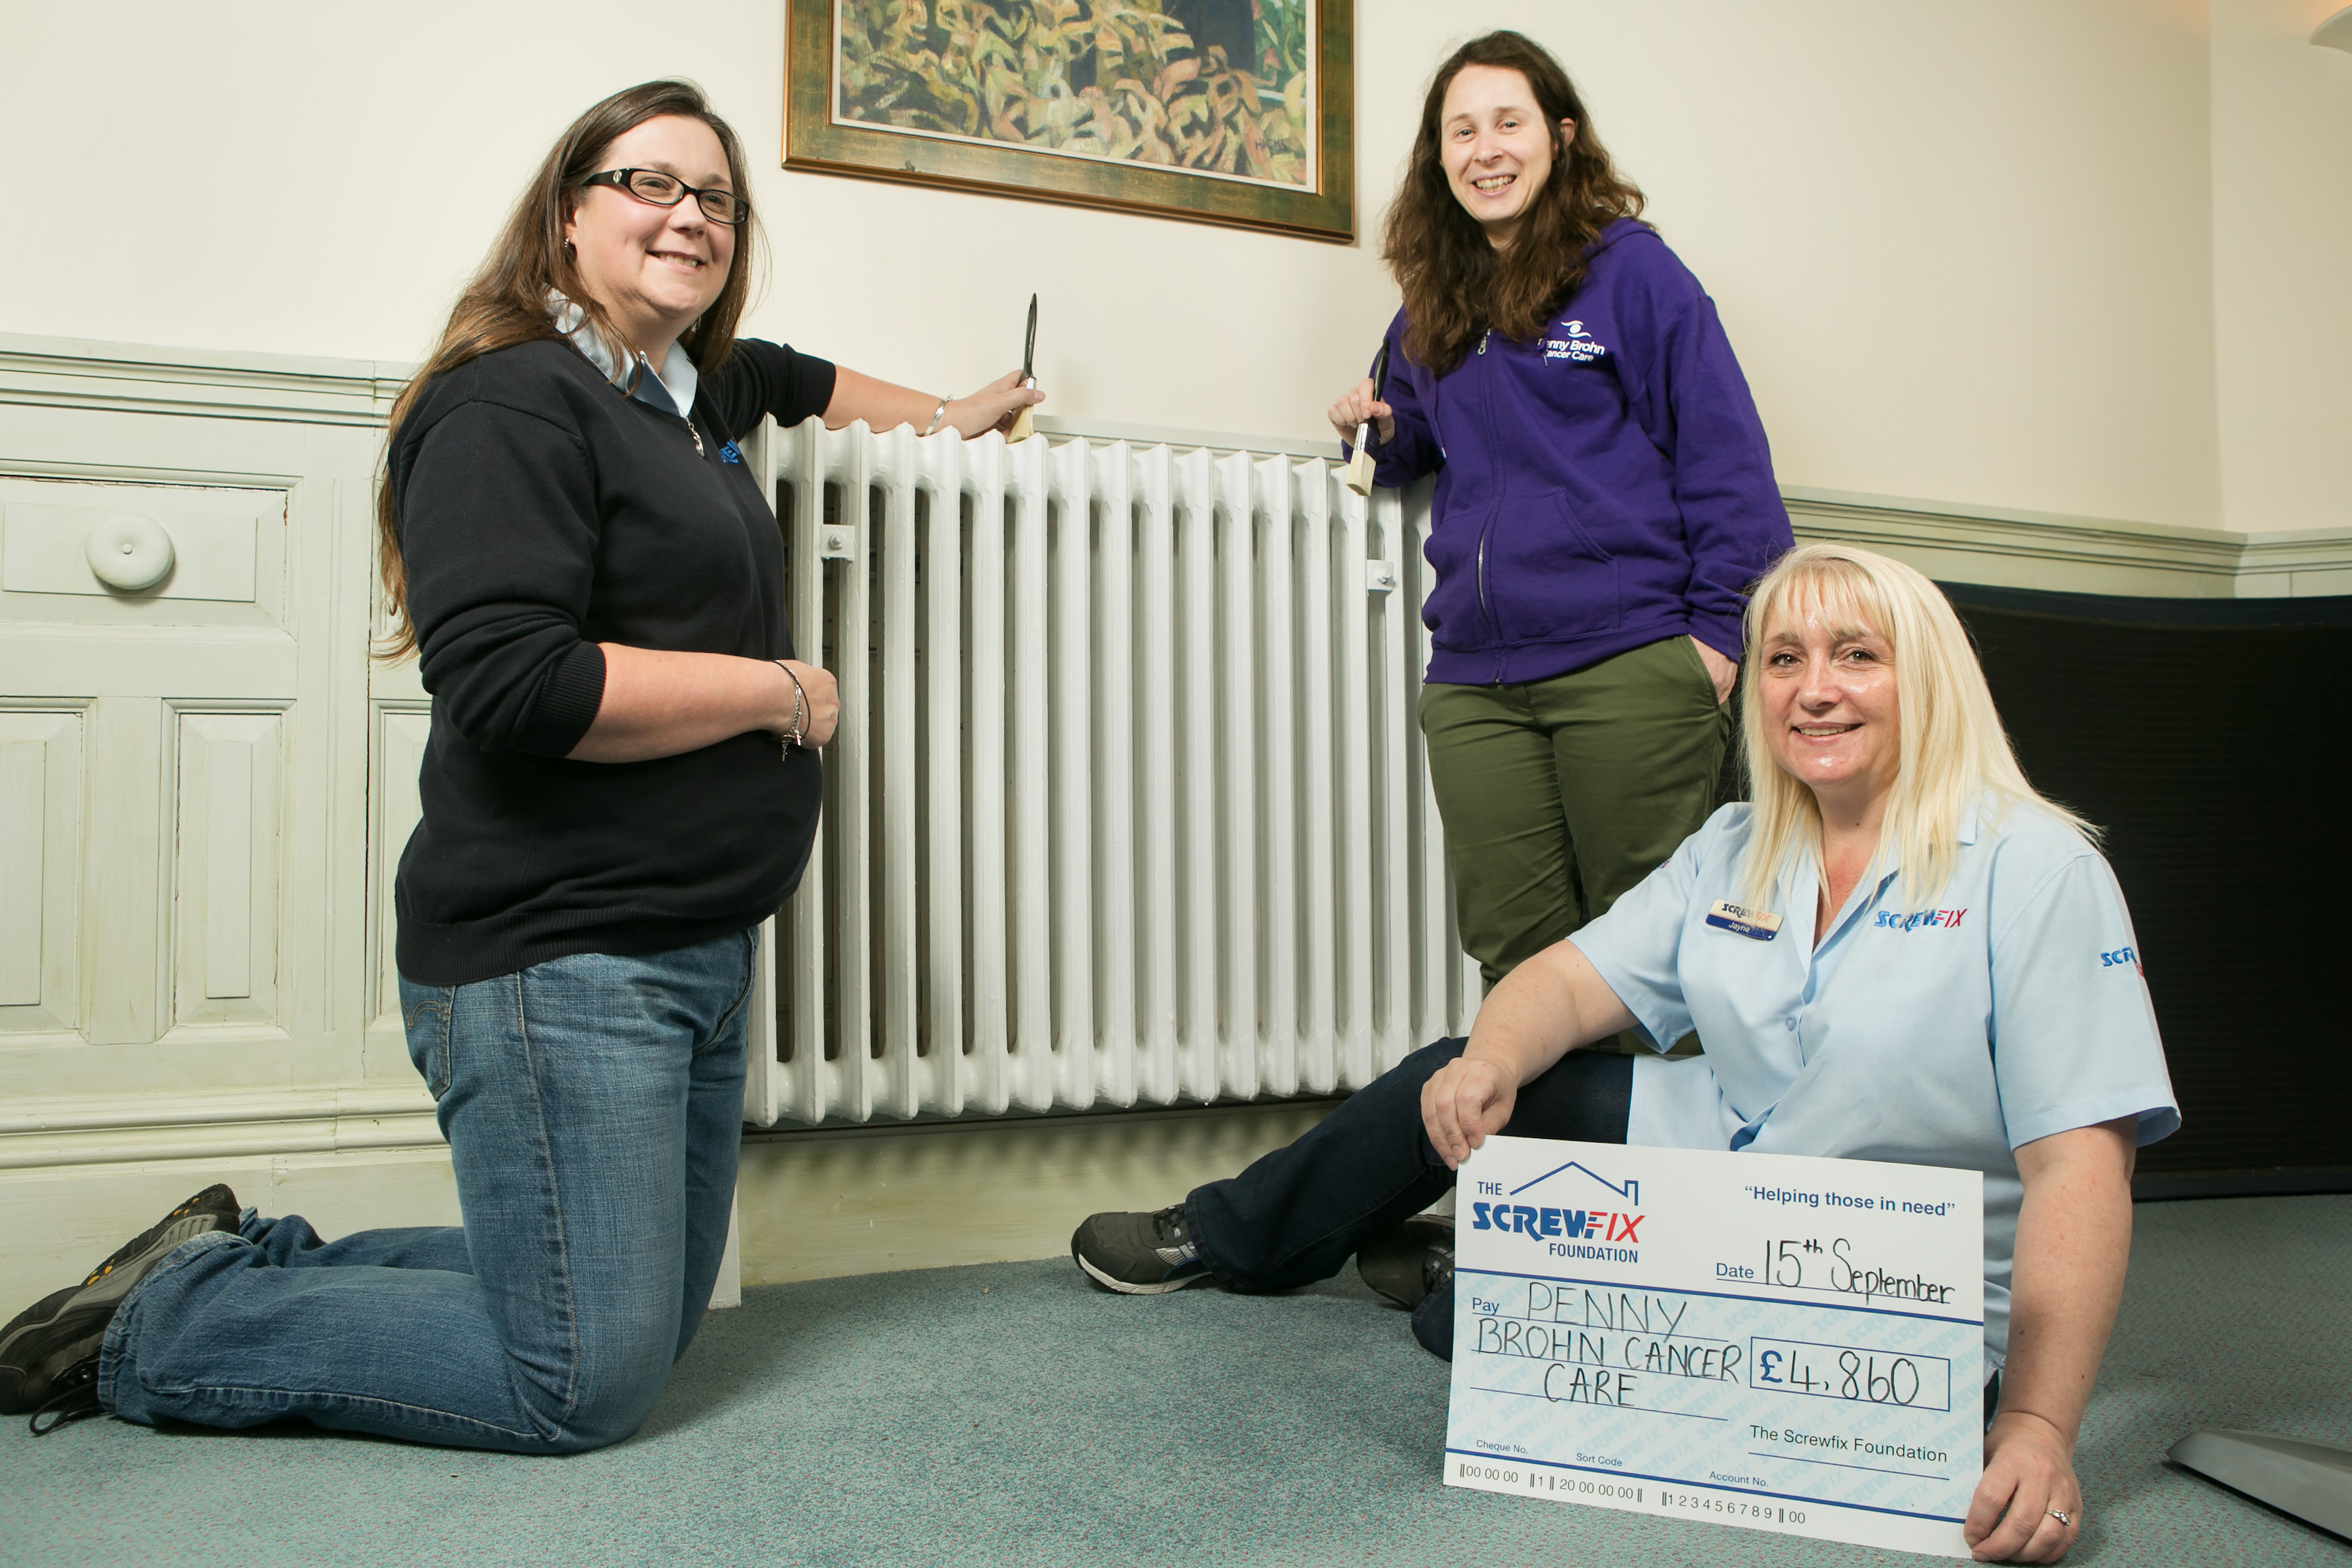 Bristol based charity gets a helping hand from the Screwfix Foundation